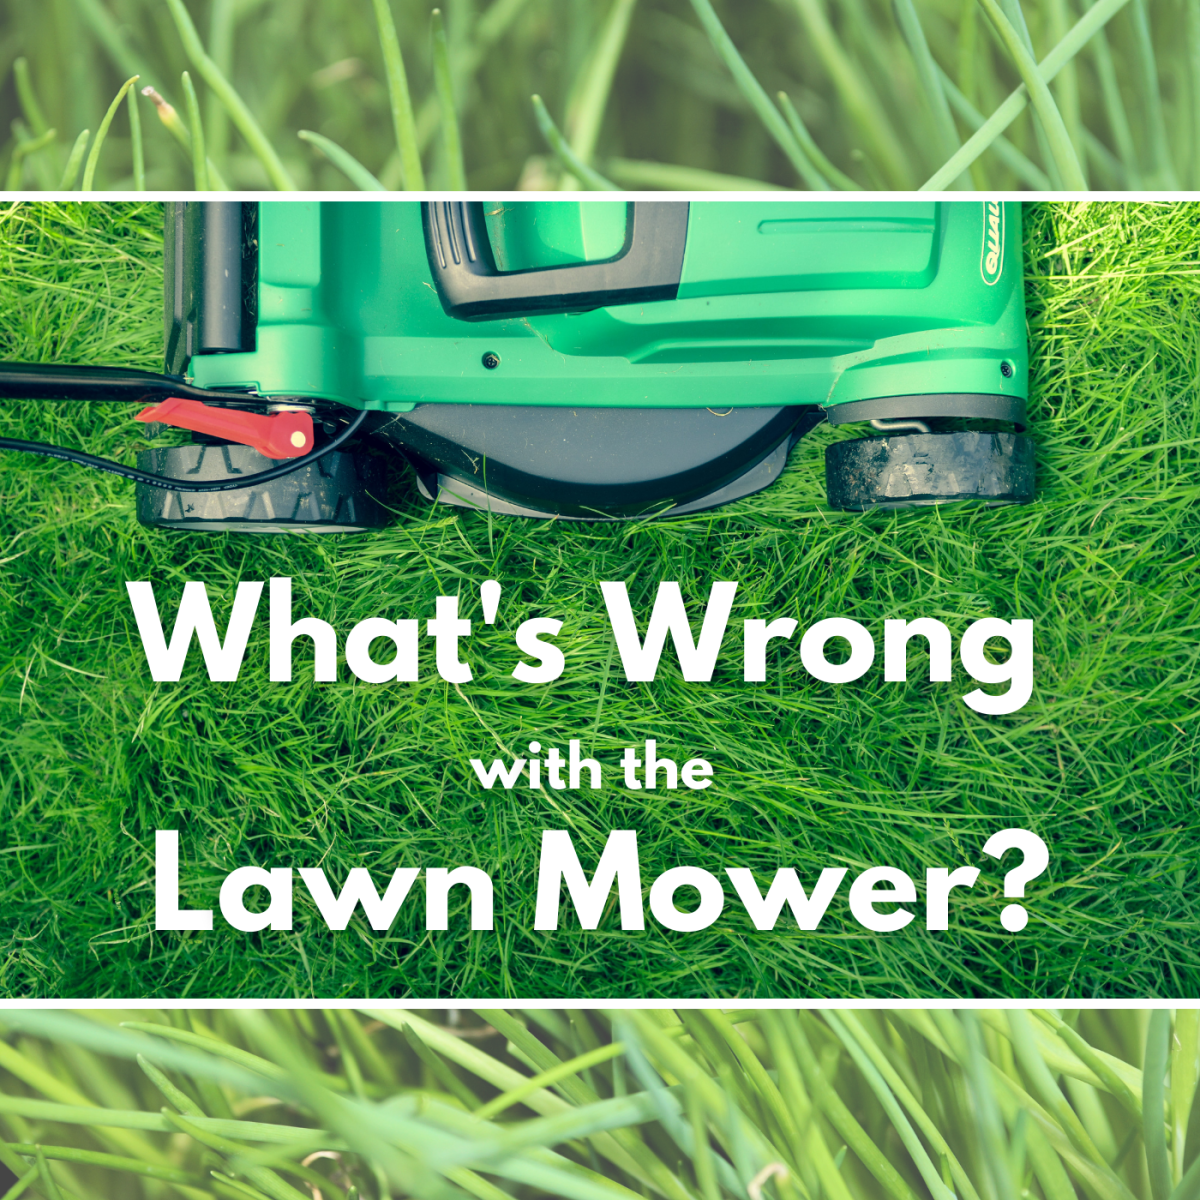 How to Diagnose and Treat a Lawn Mower That Won't Start